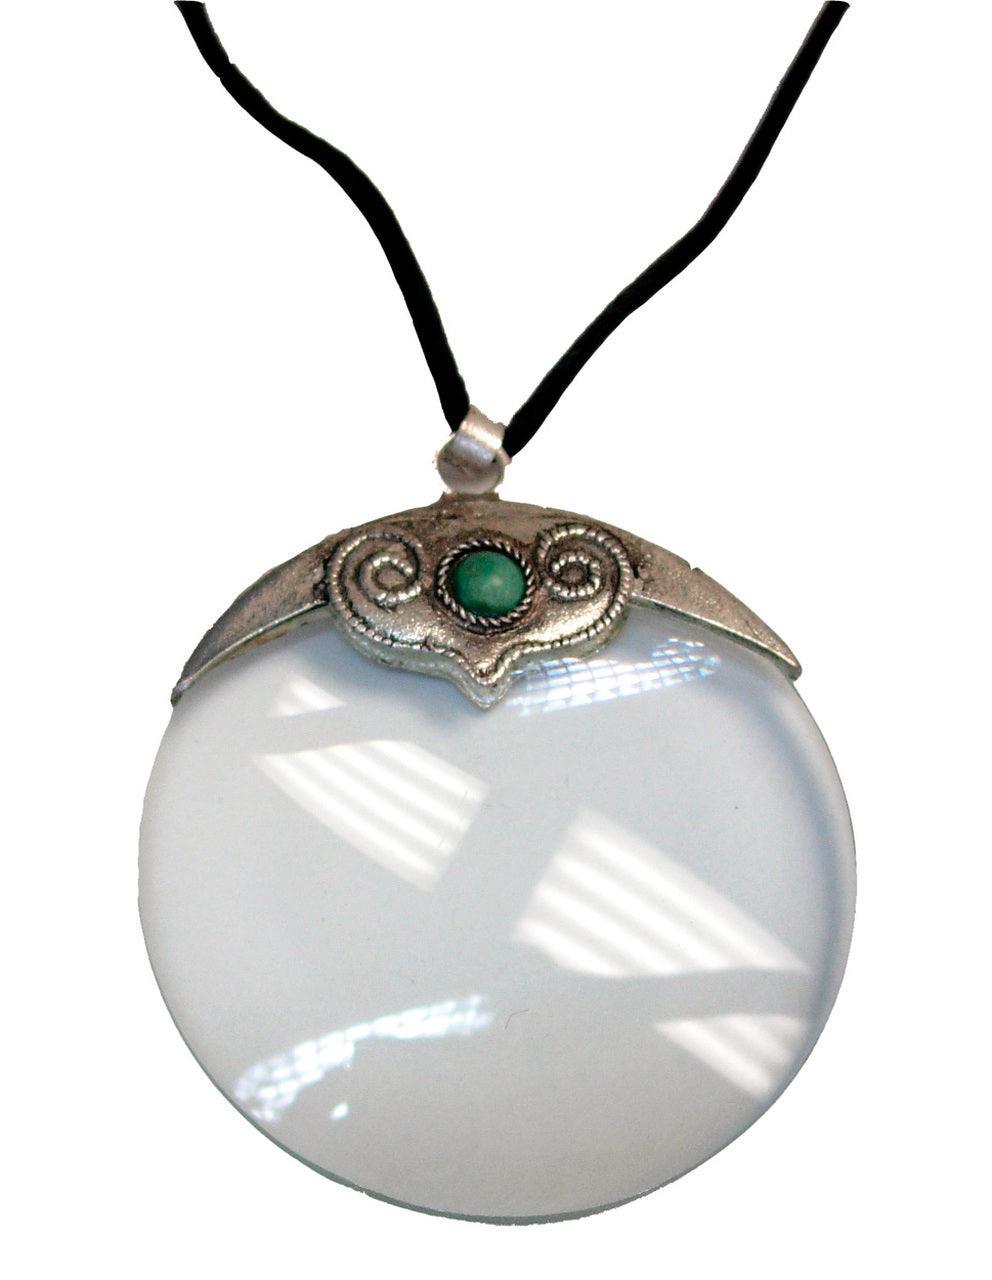 Pendant 4X Magnifier with Stone - The Low Vision Store